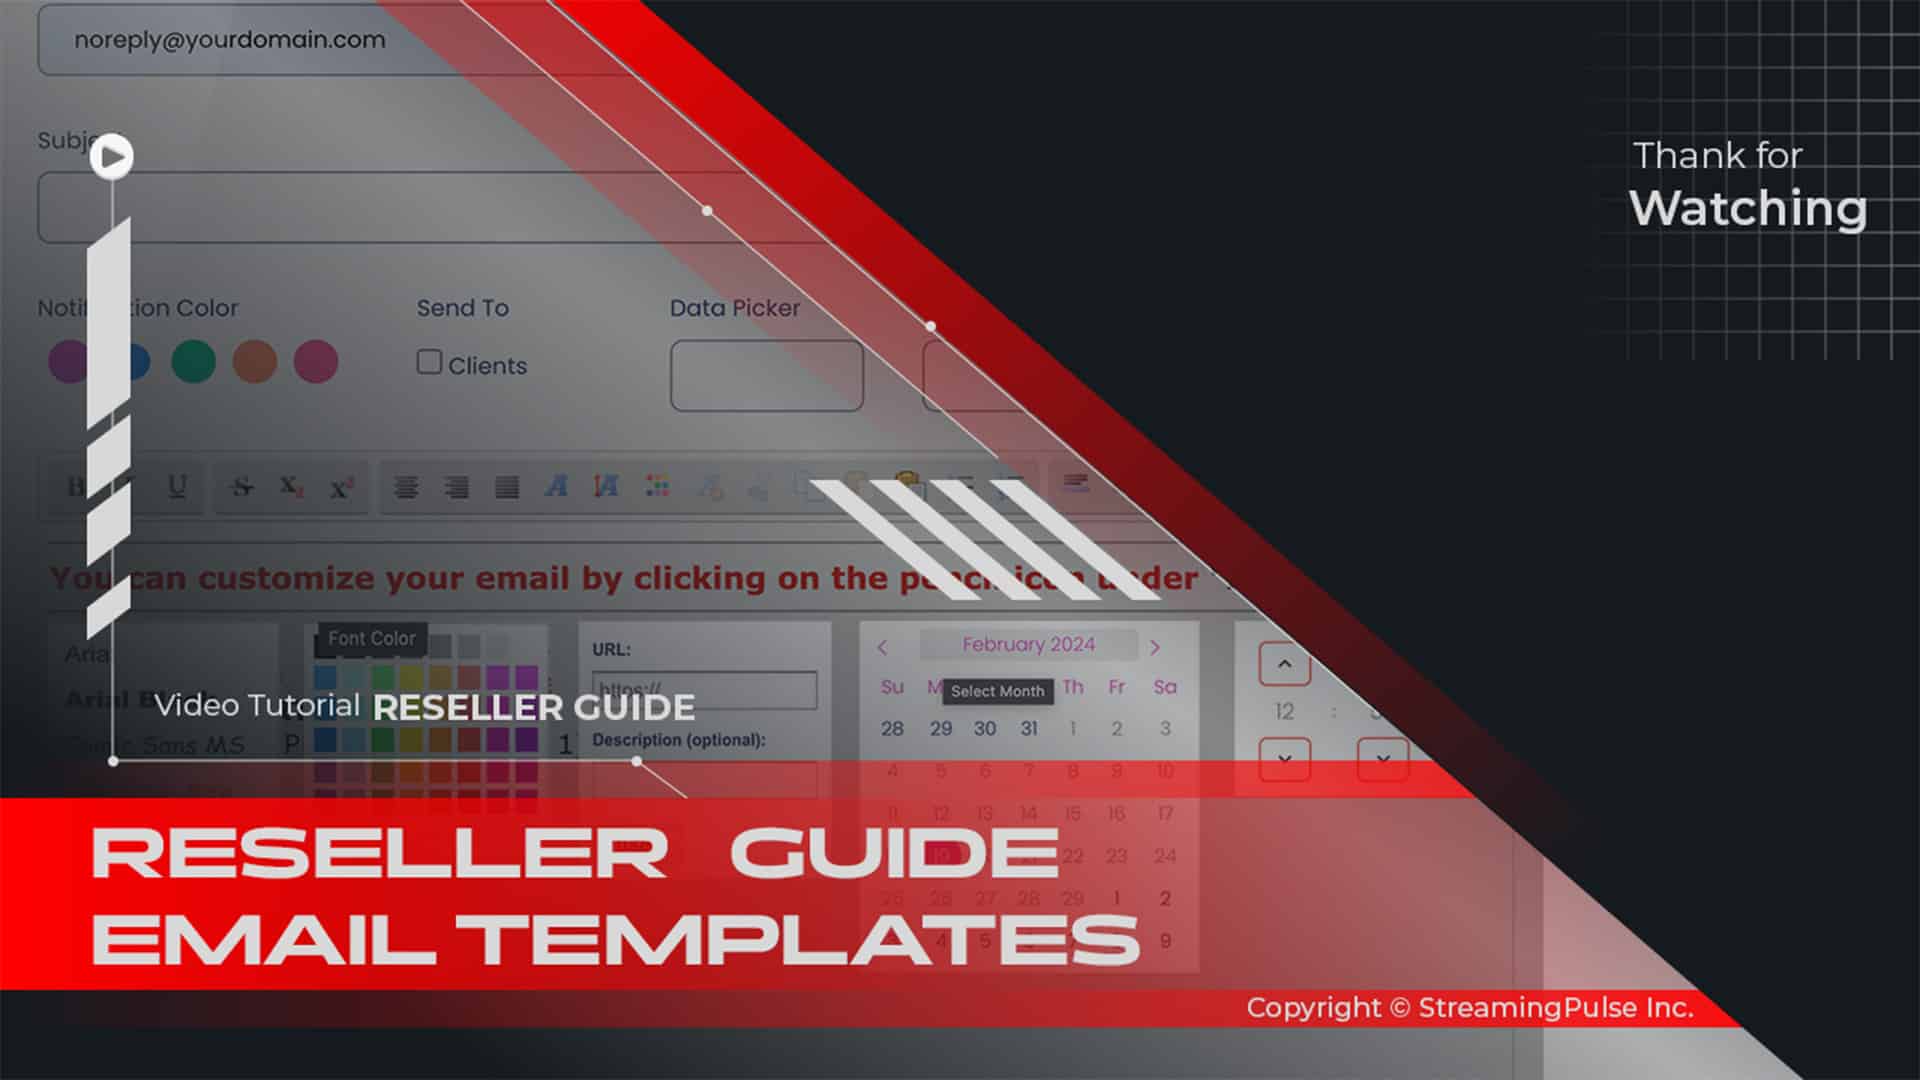 MojoCP Reseller Guide Email Templates